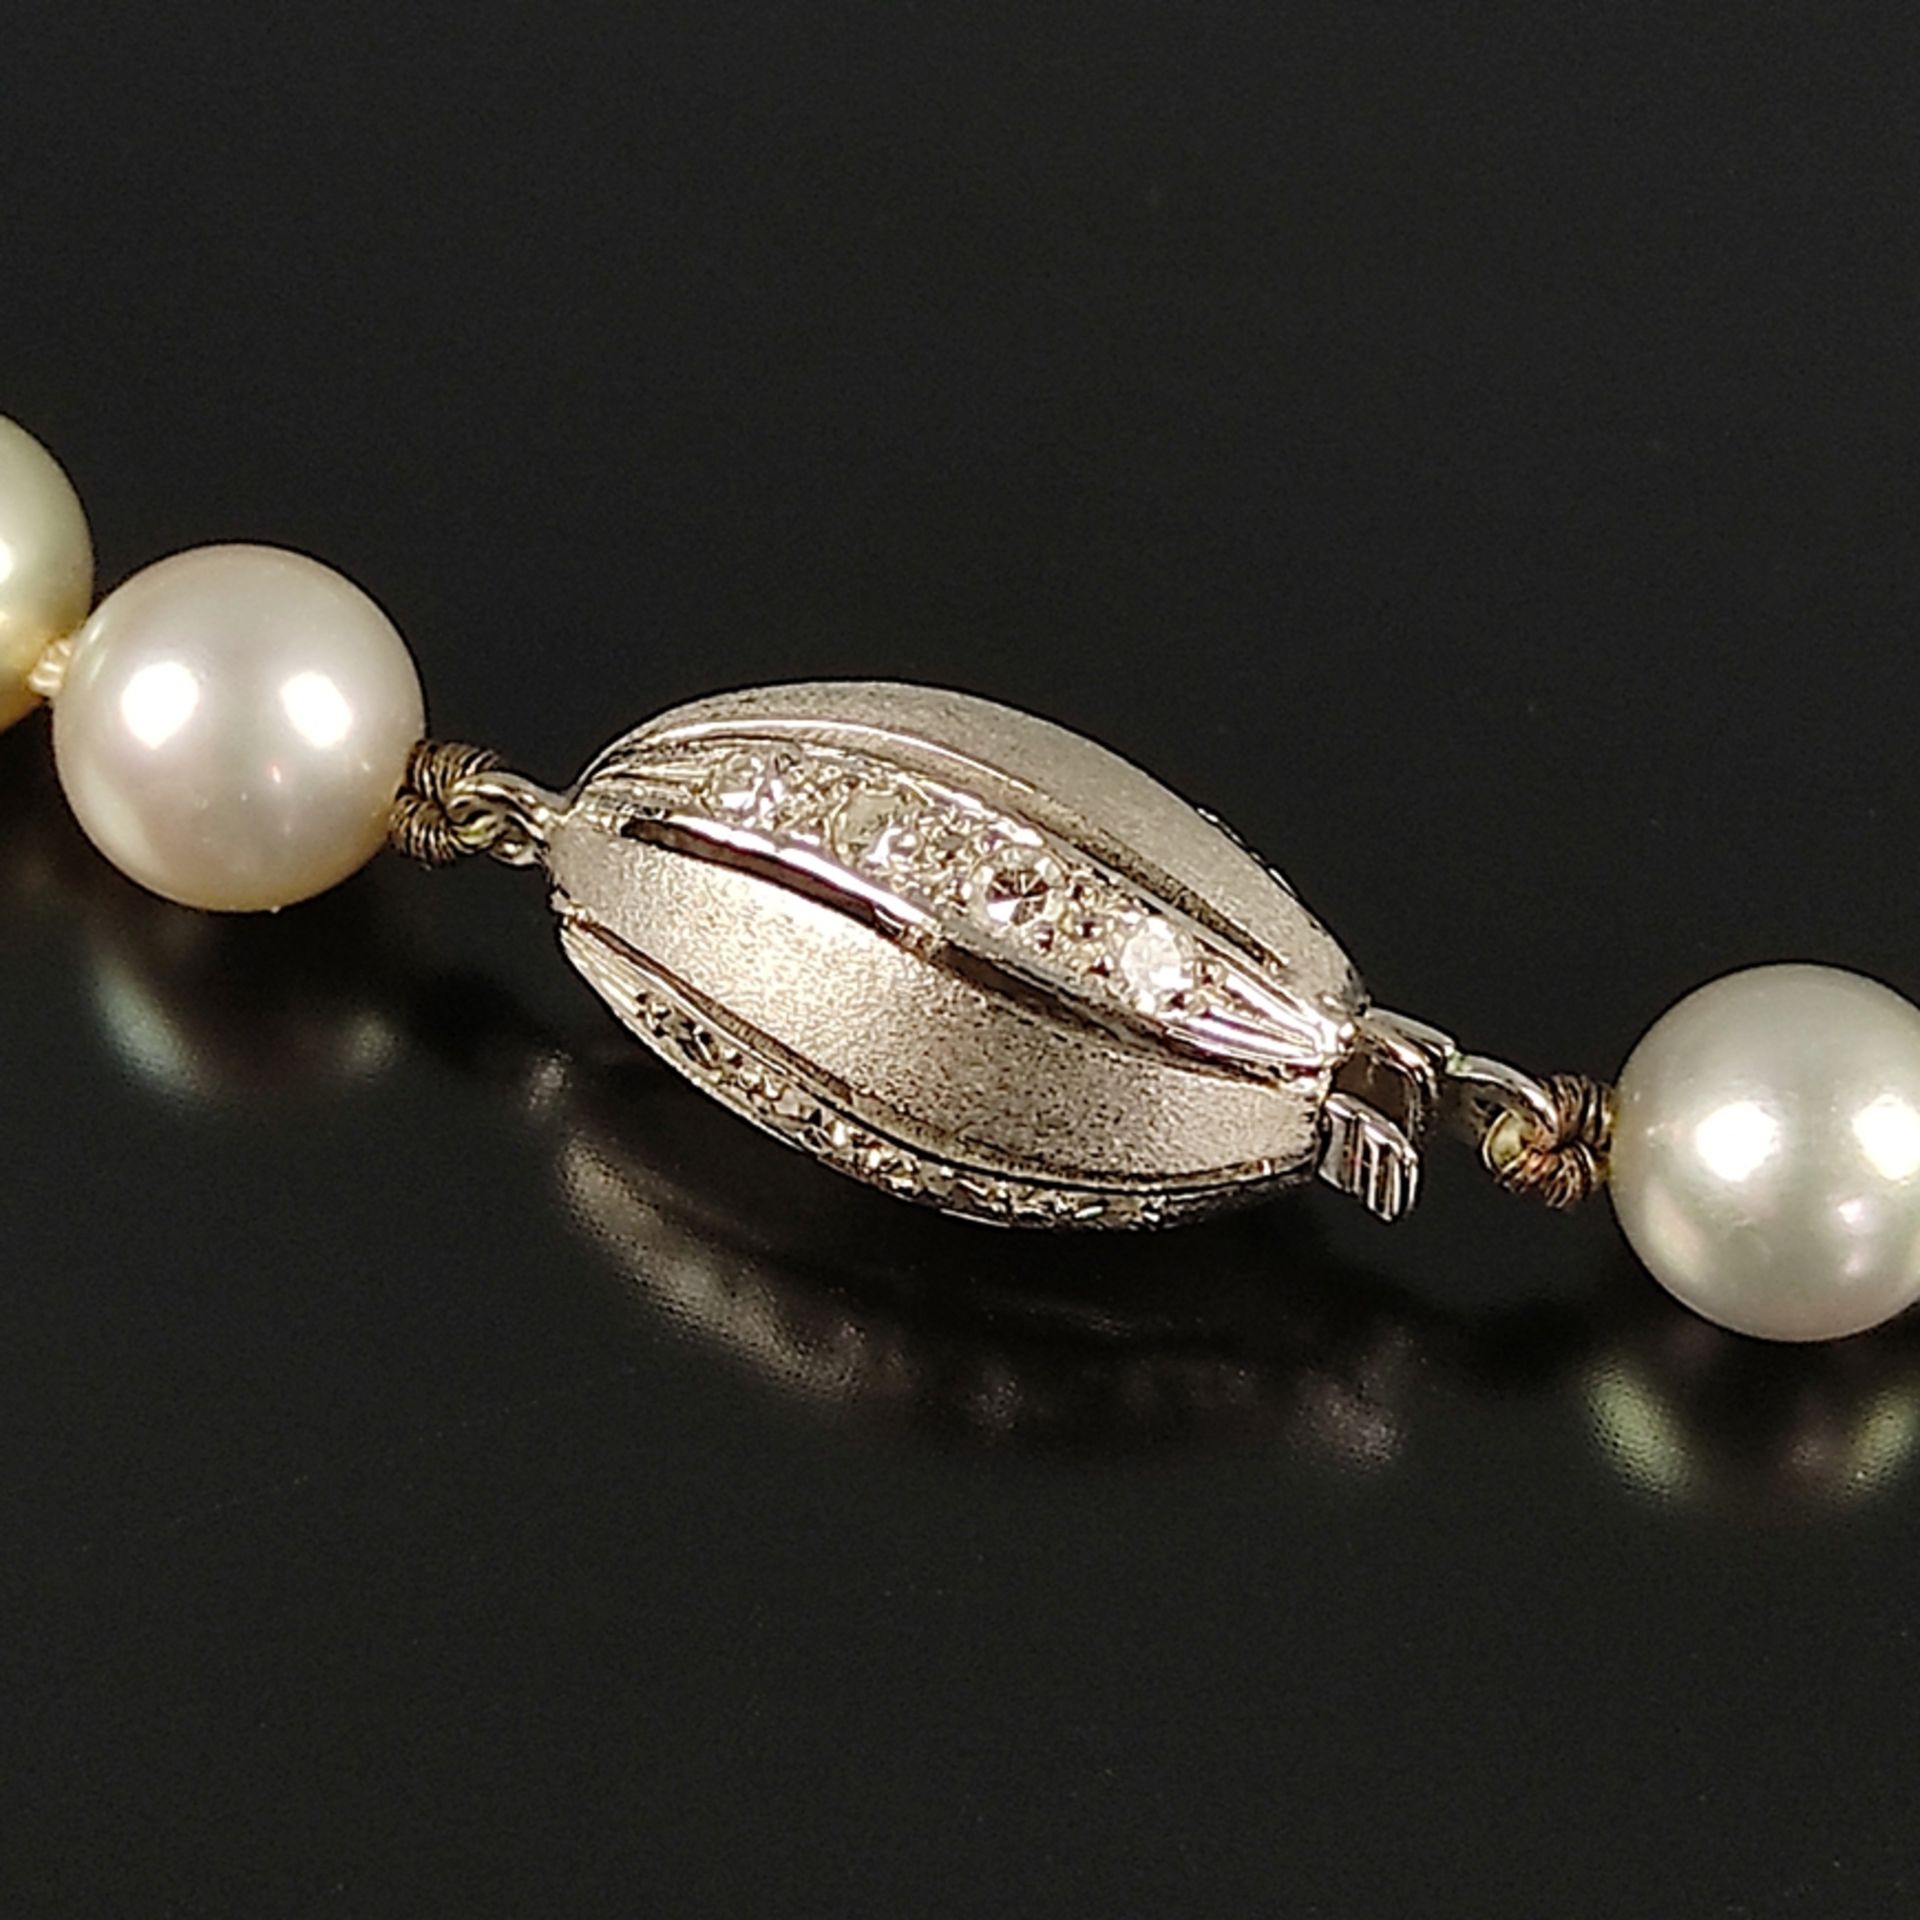 Fine pearl necklace, 585/14K white gold, total weight 28,9g, fine cultured pearls in light grey lus - Image 2 of 3